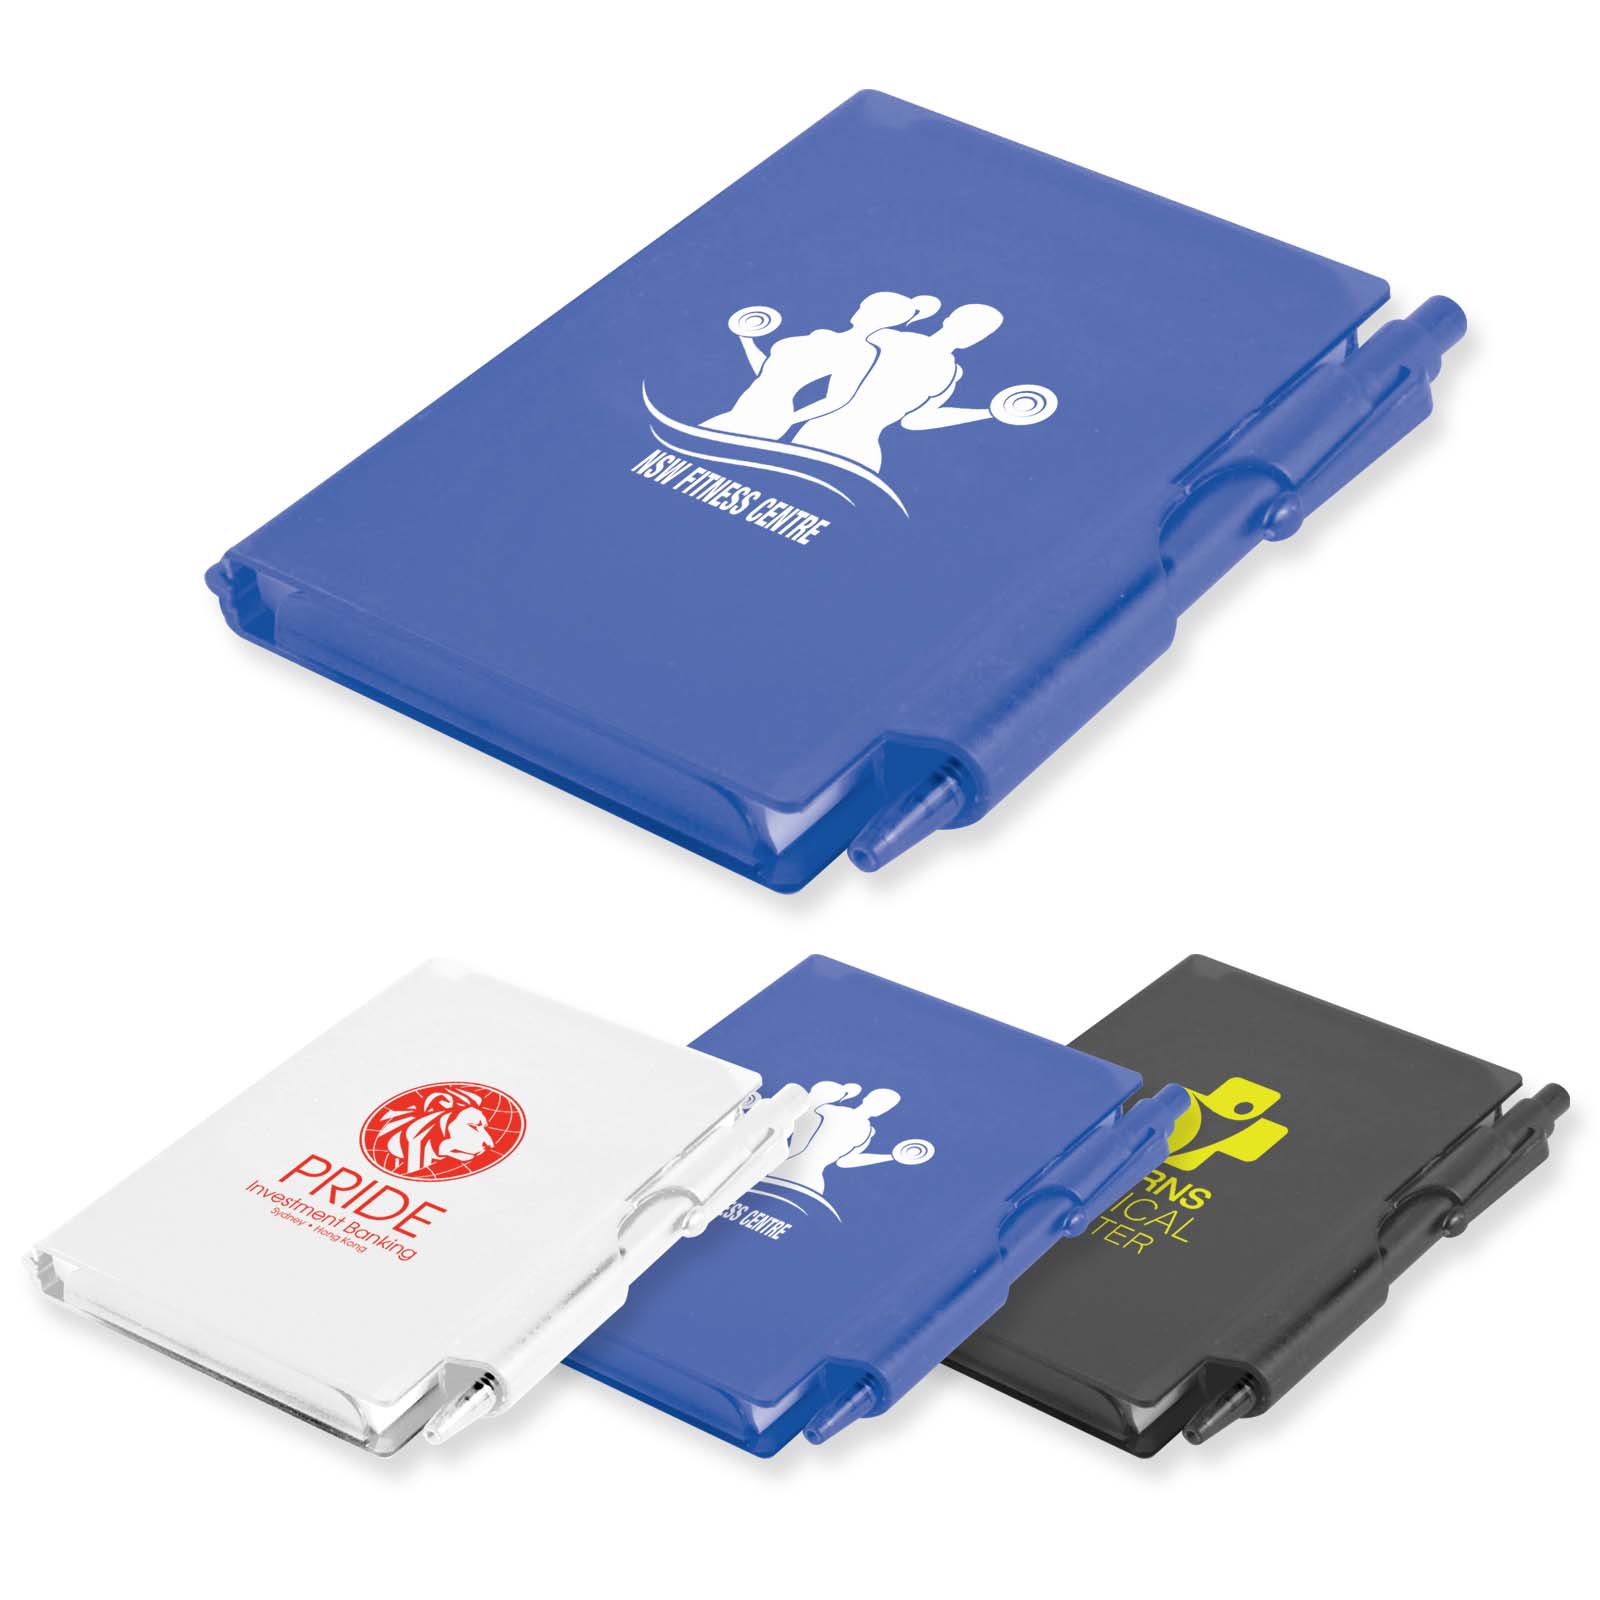 LL4 Odyssey Pocket Notebook with Pen notebook